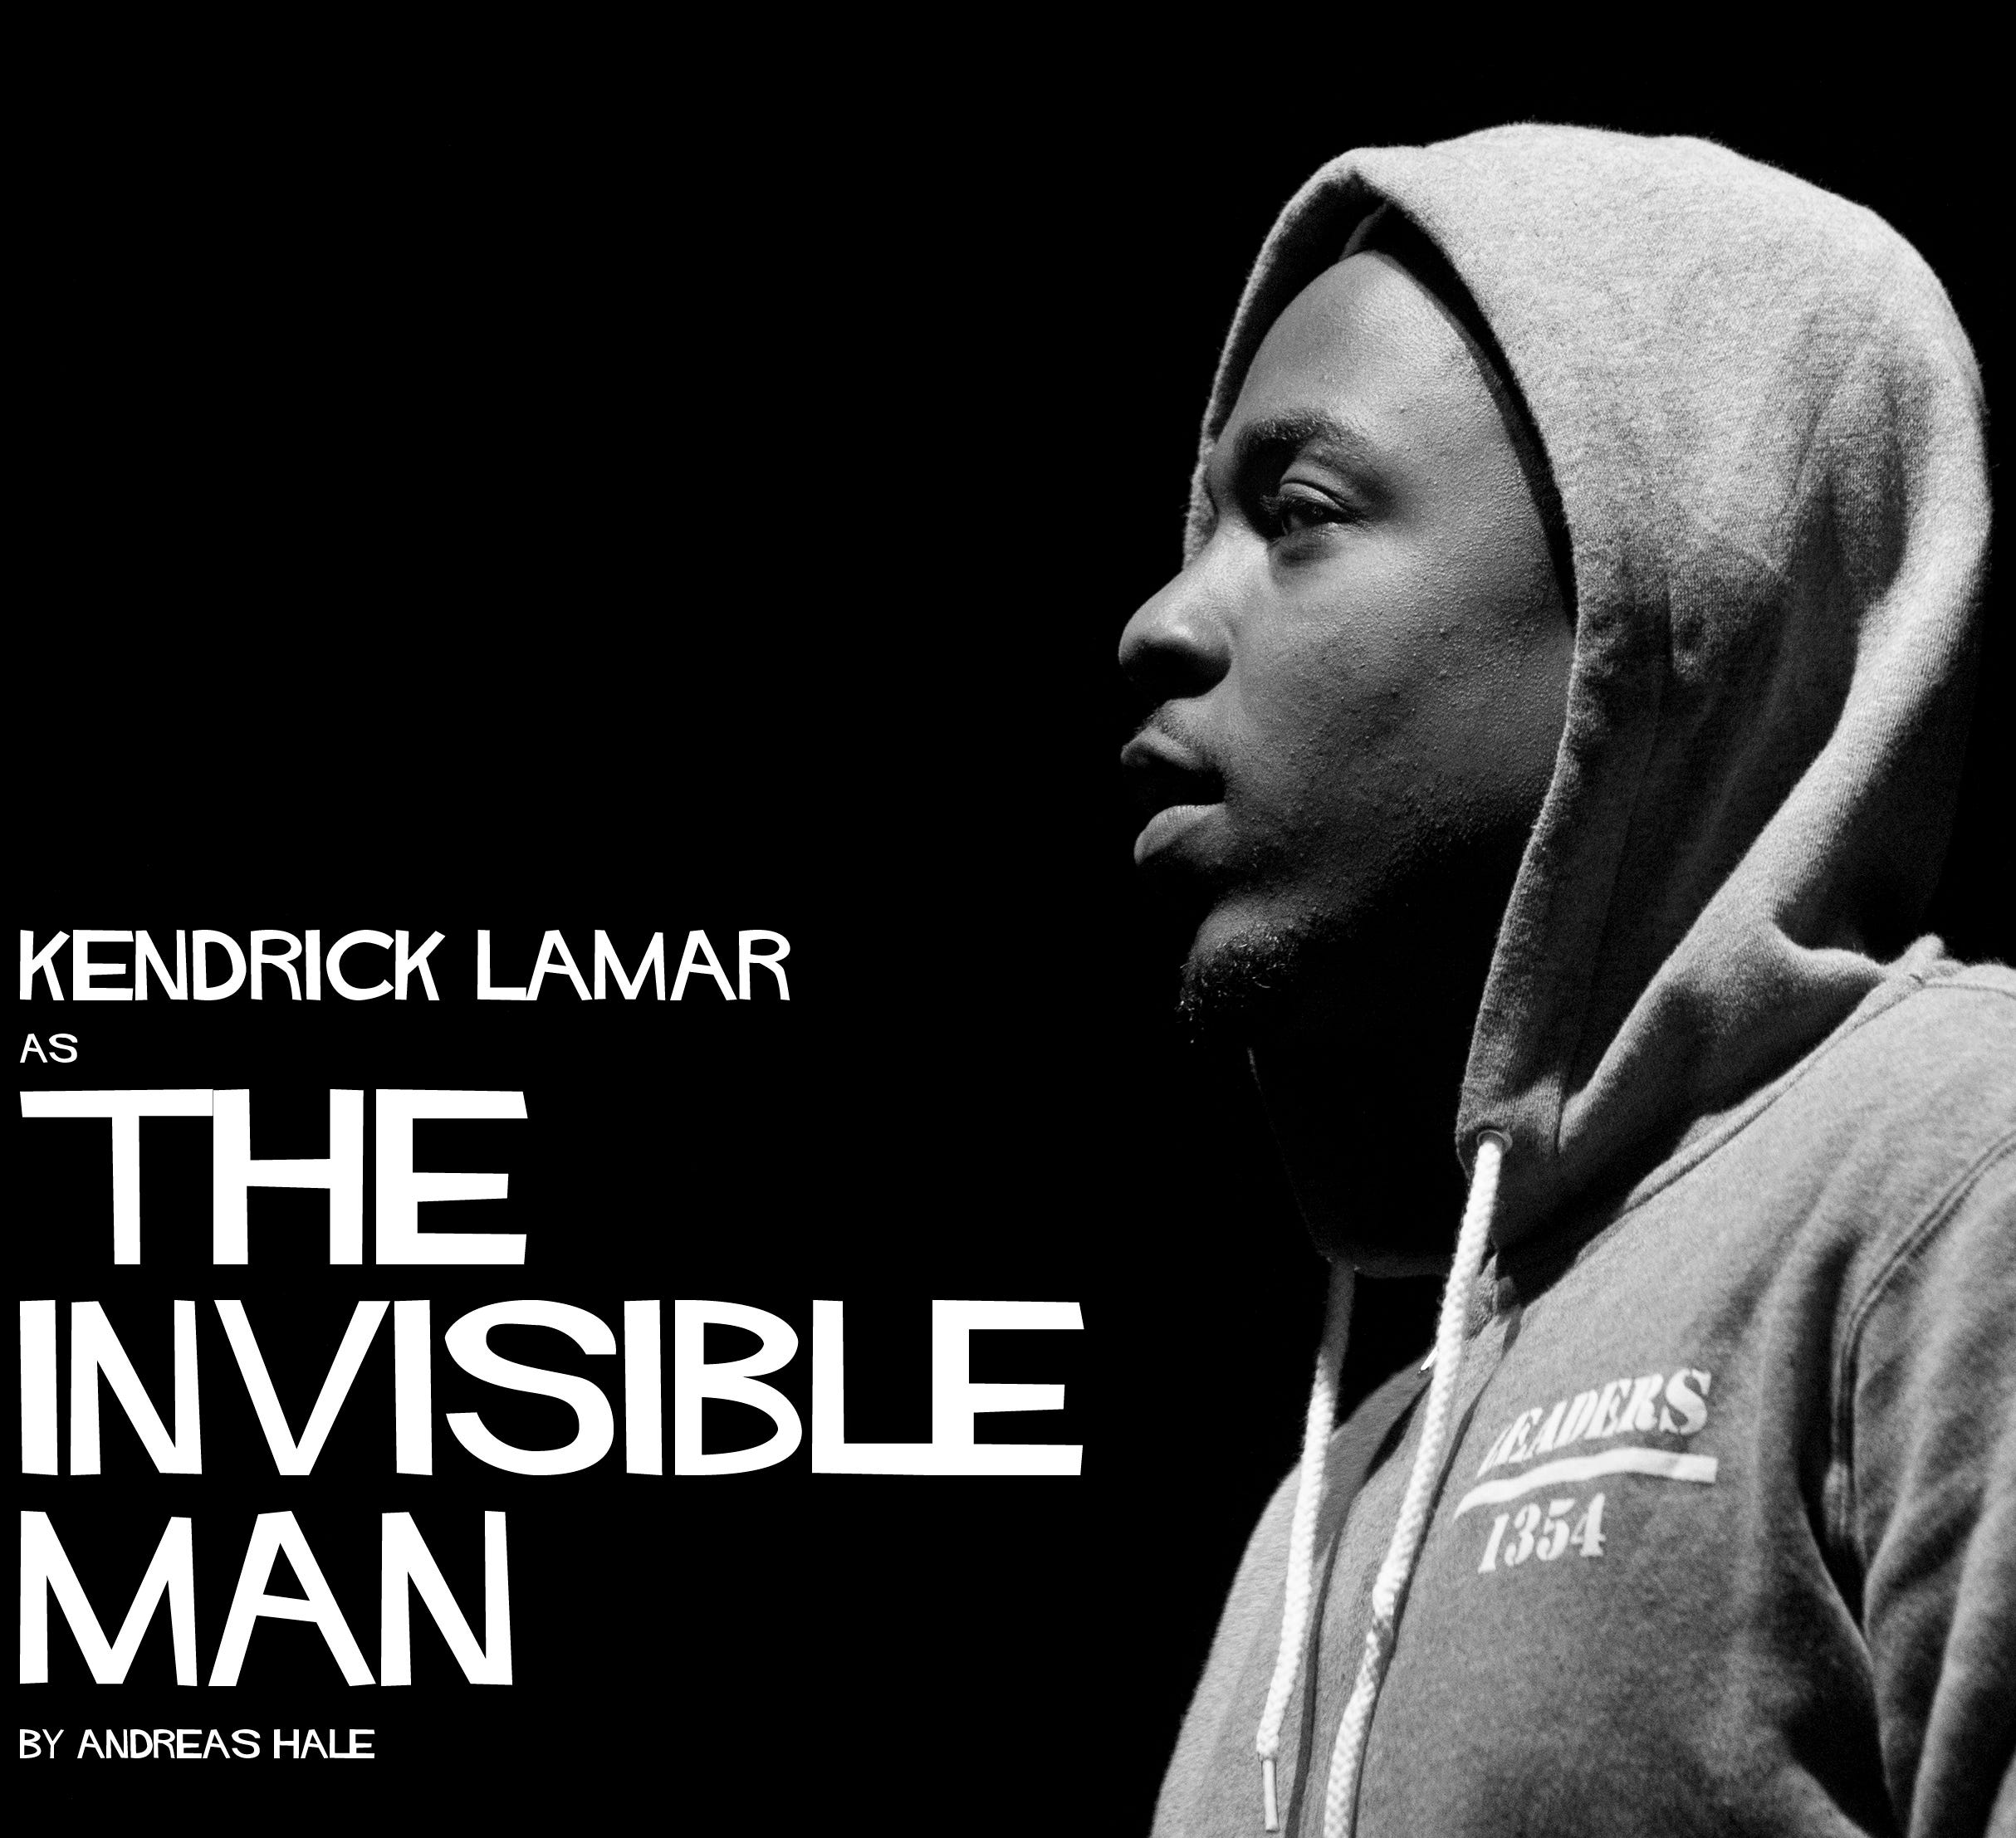 Kendrick Lamar is Ralph Ellison's Invisible Man | by Andreas Hale |  Cuepoint | Medium